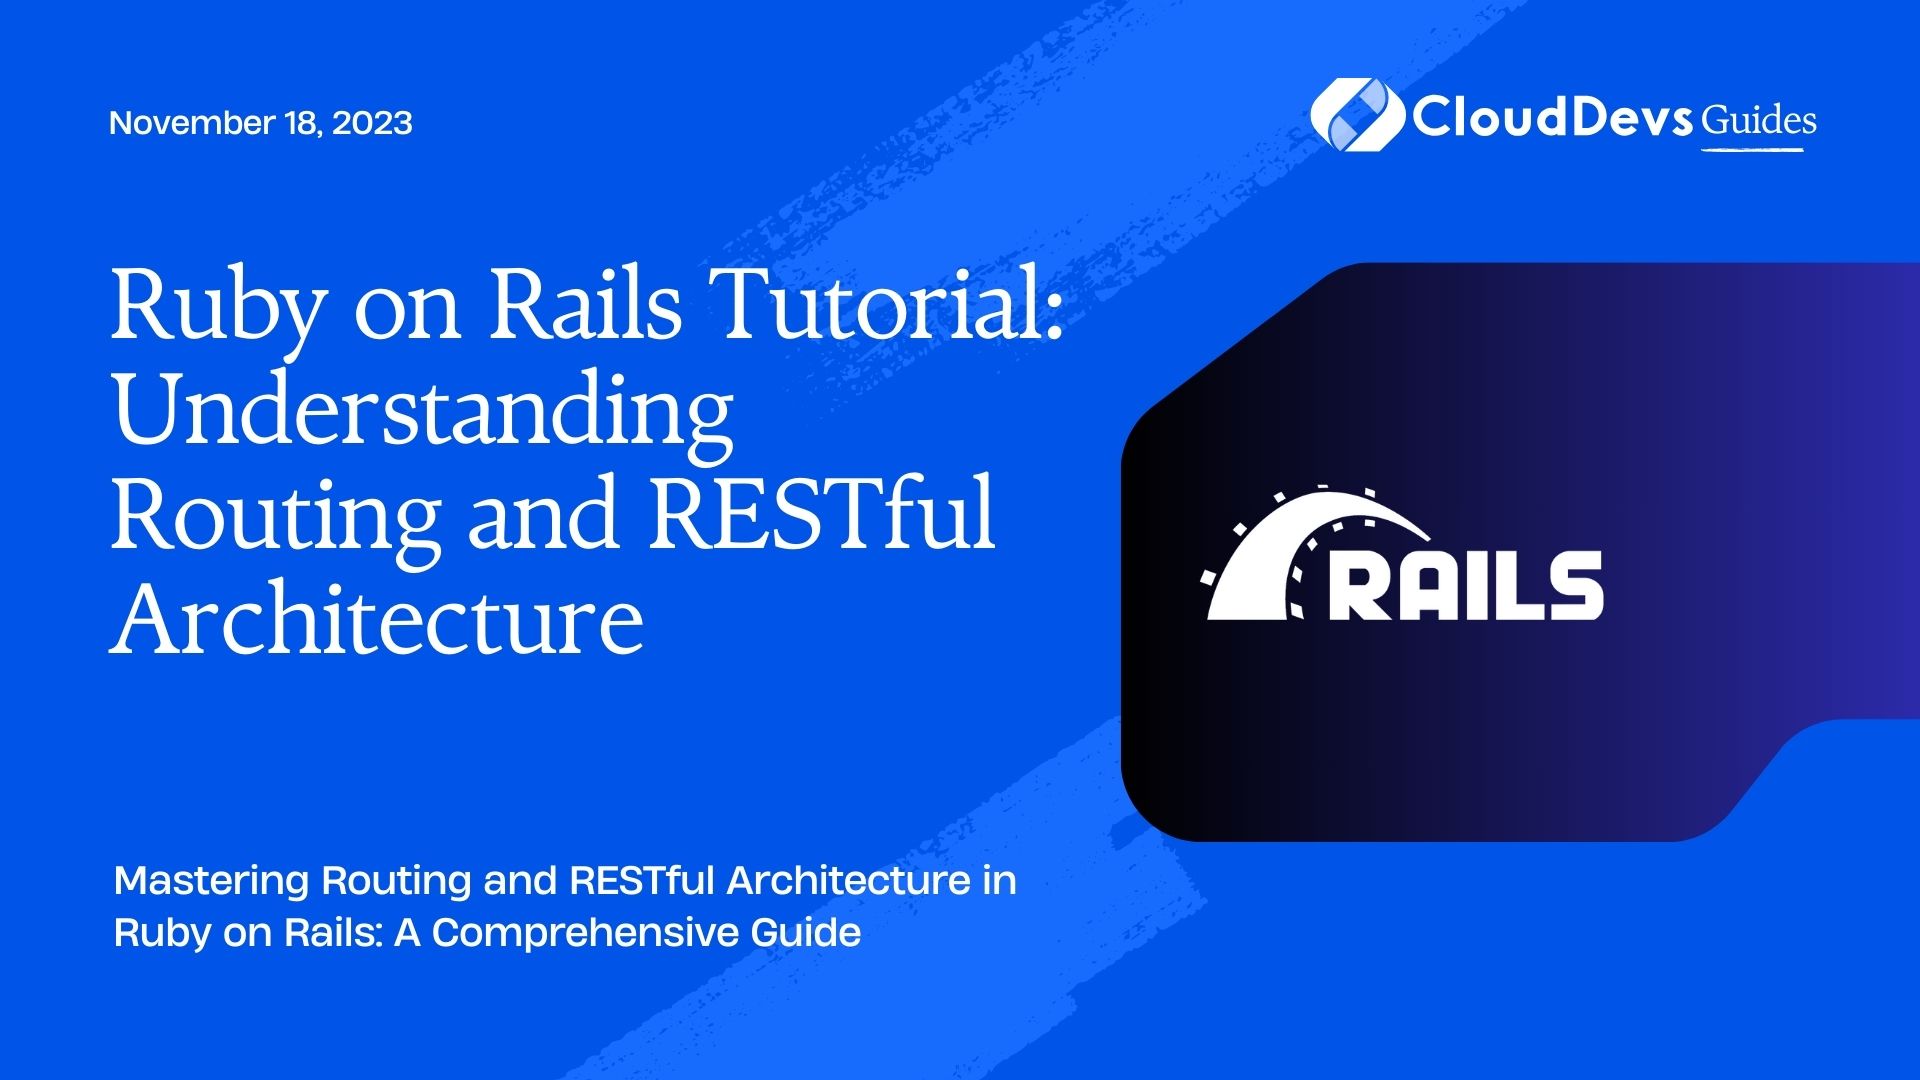 Ruby on Rails Tutorial: Understanding Routing and RESTful Architecture